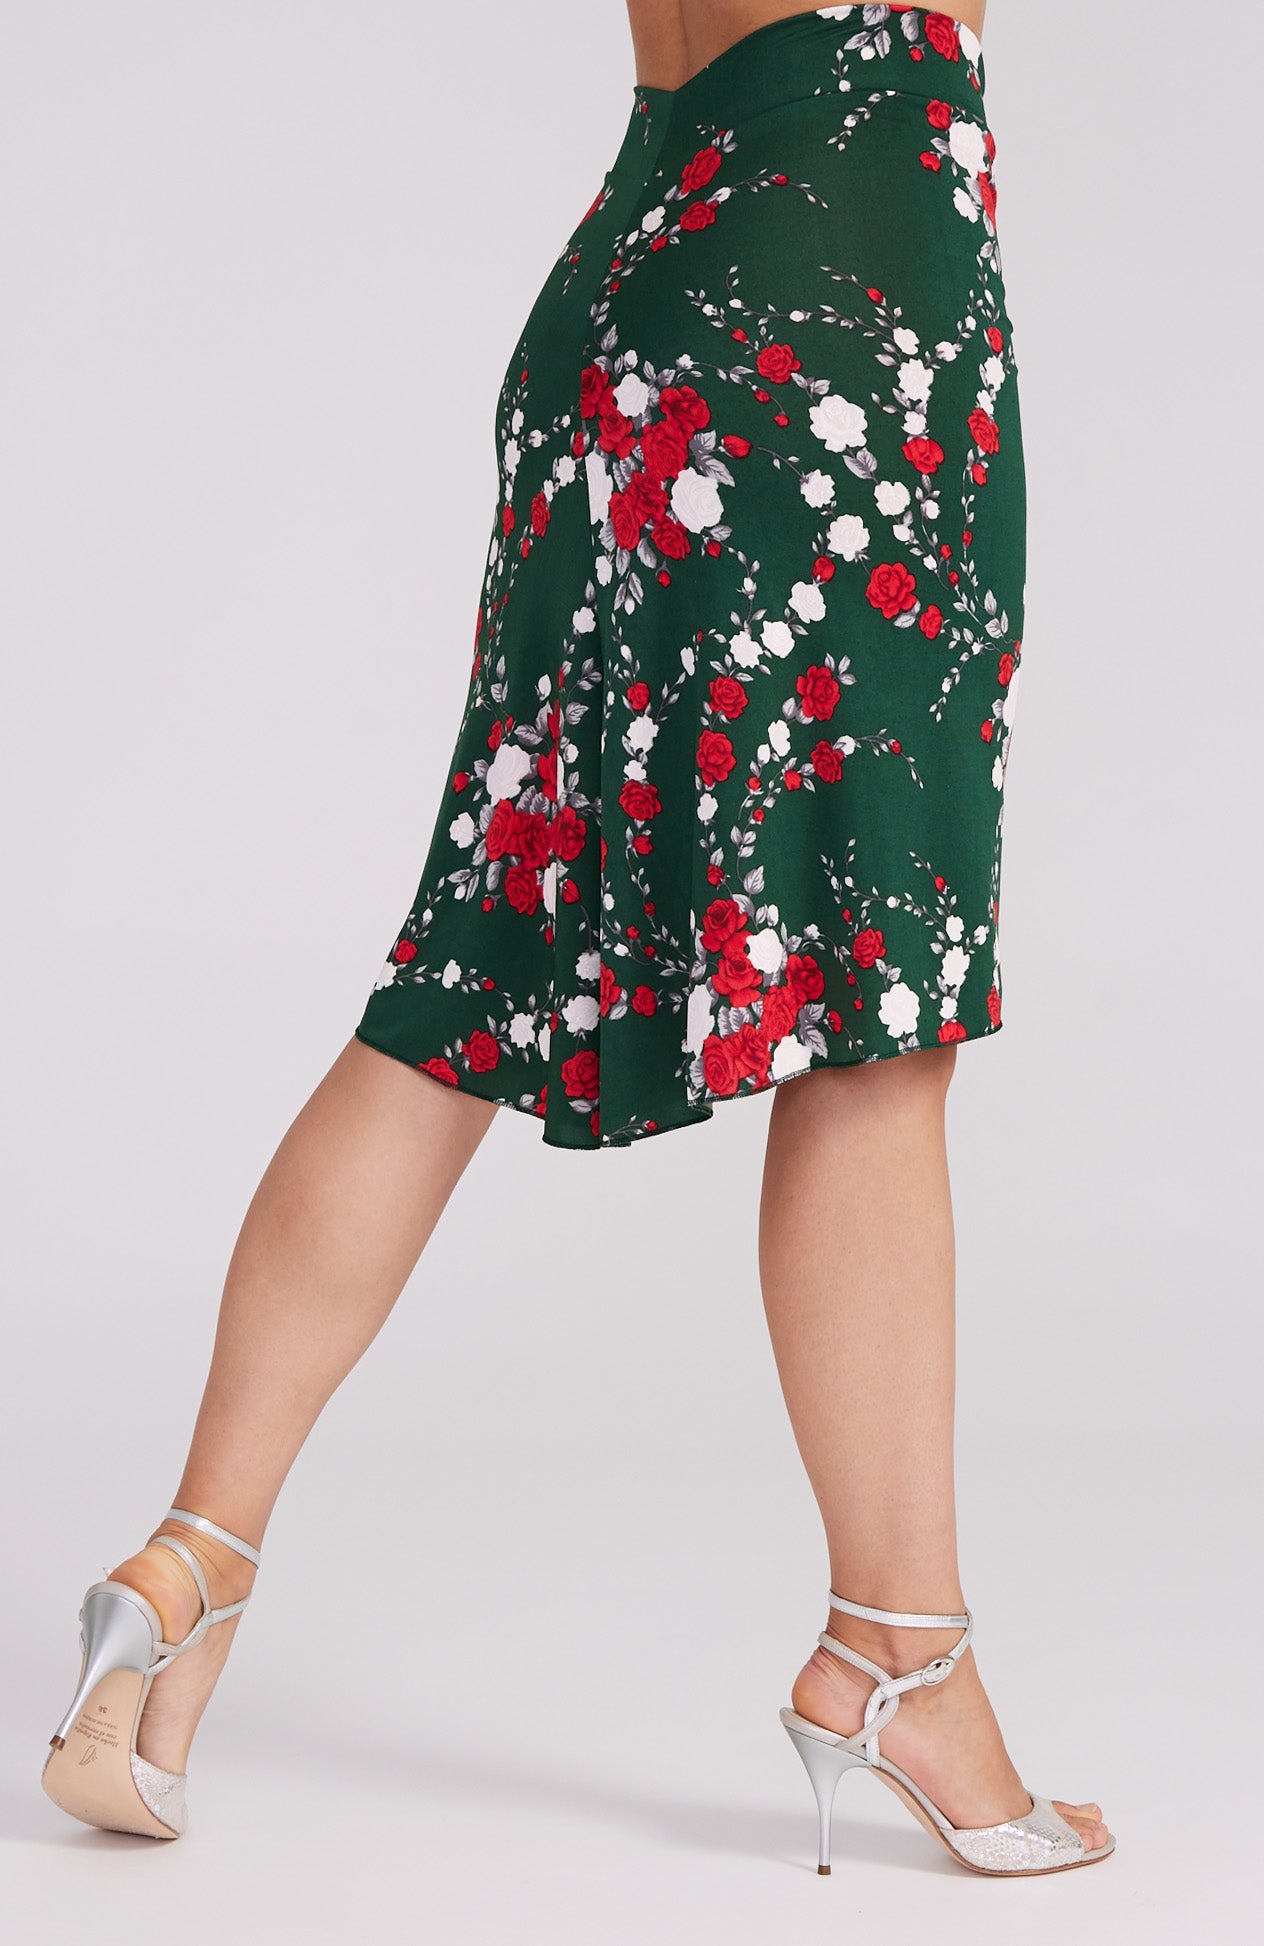 argentine tango skirt in red rose print on green